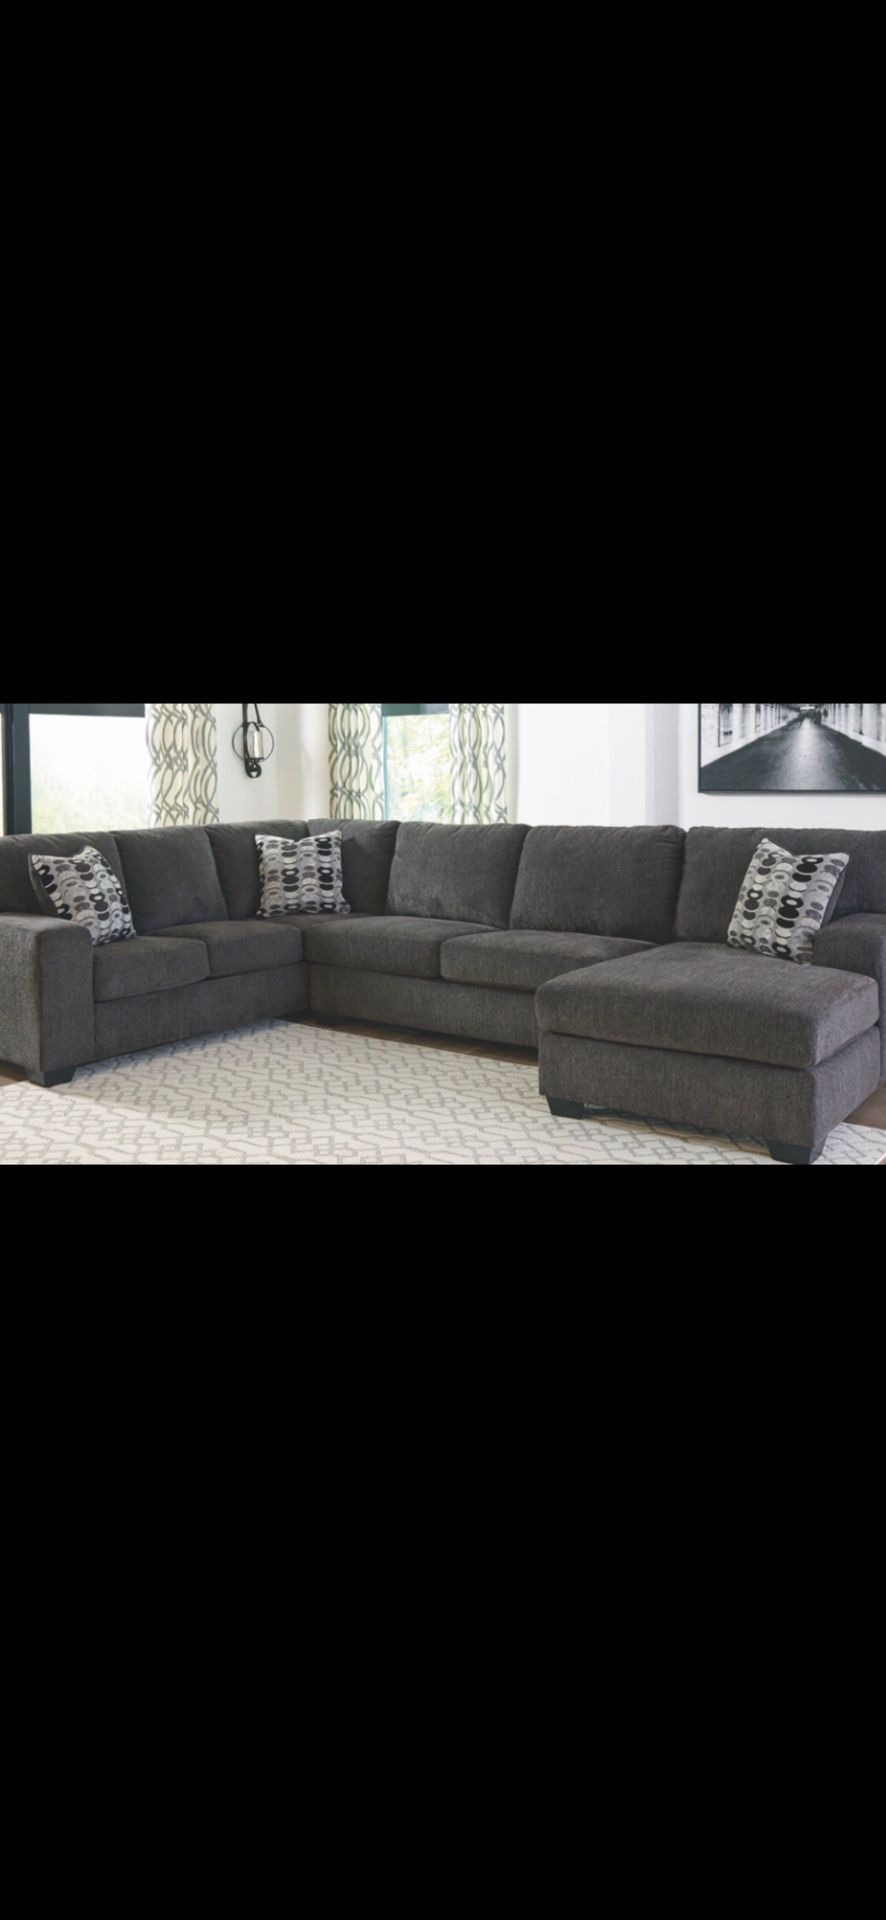 Brand new! Urban comfy sofa chaise sectional with pillows!!